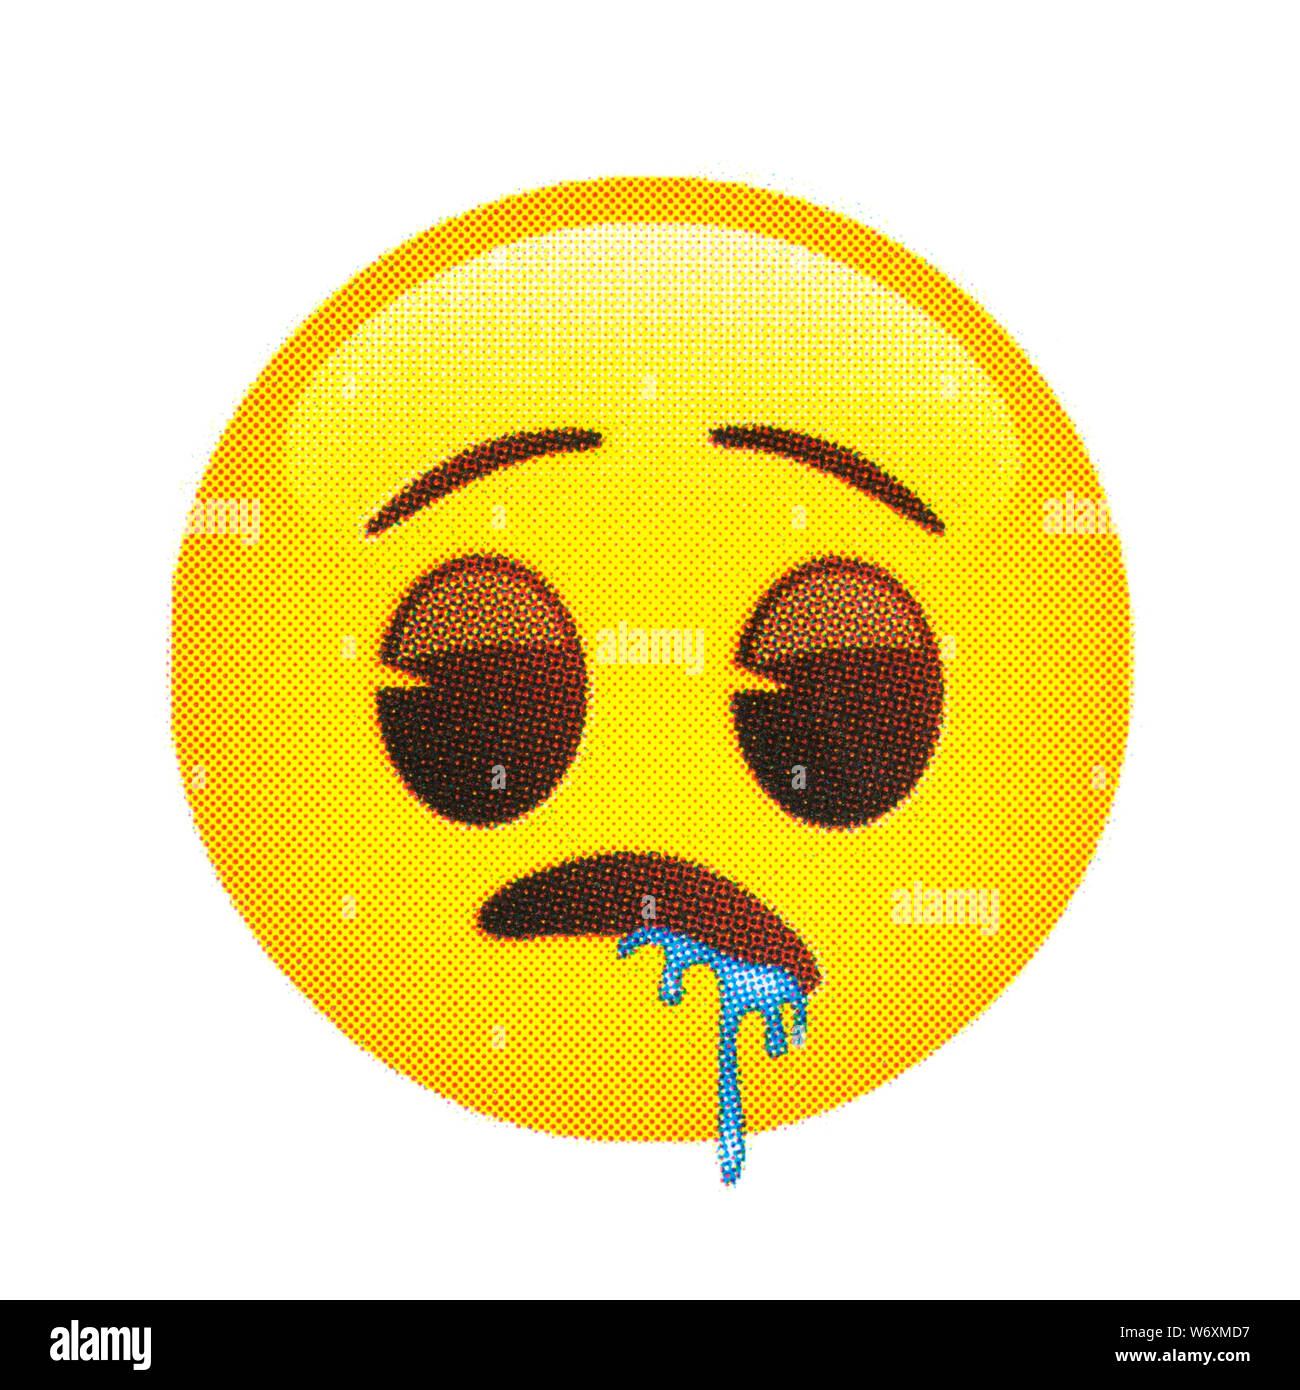 Drooling face emoticon Stock Photo